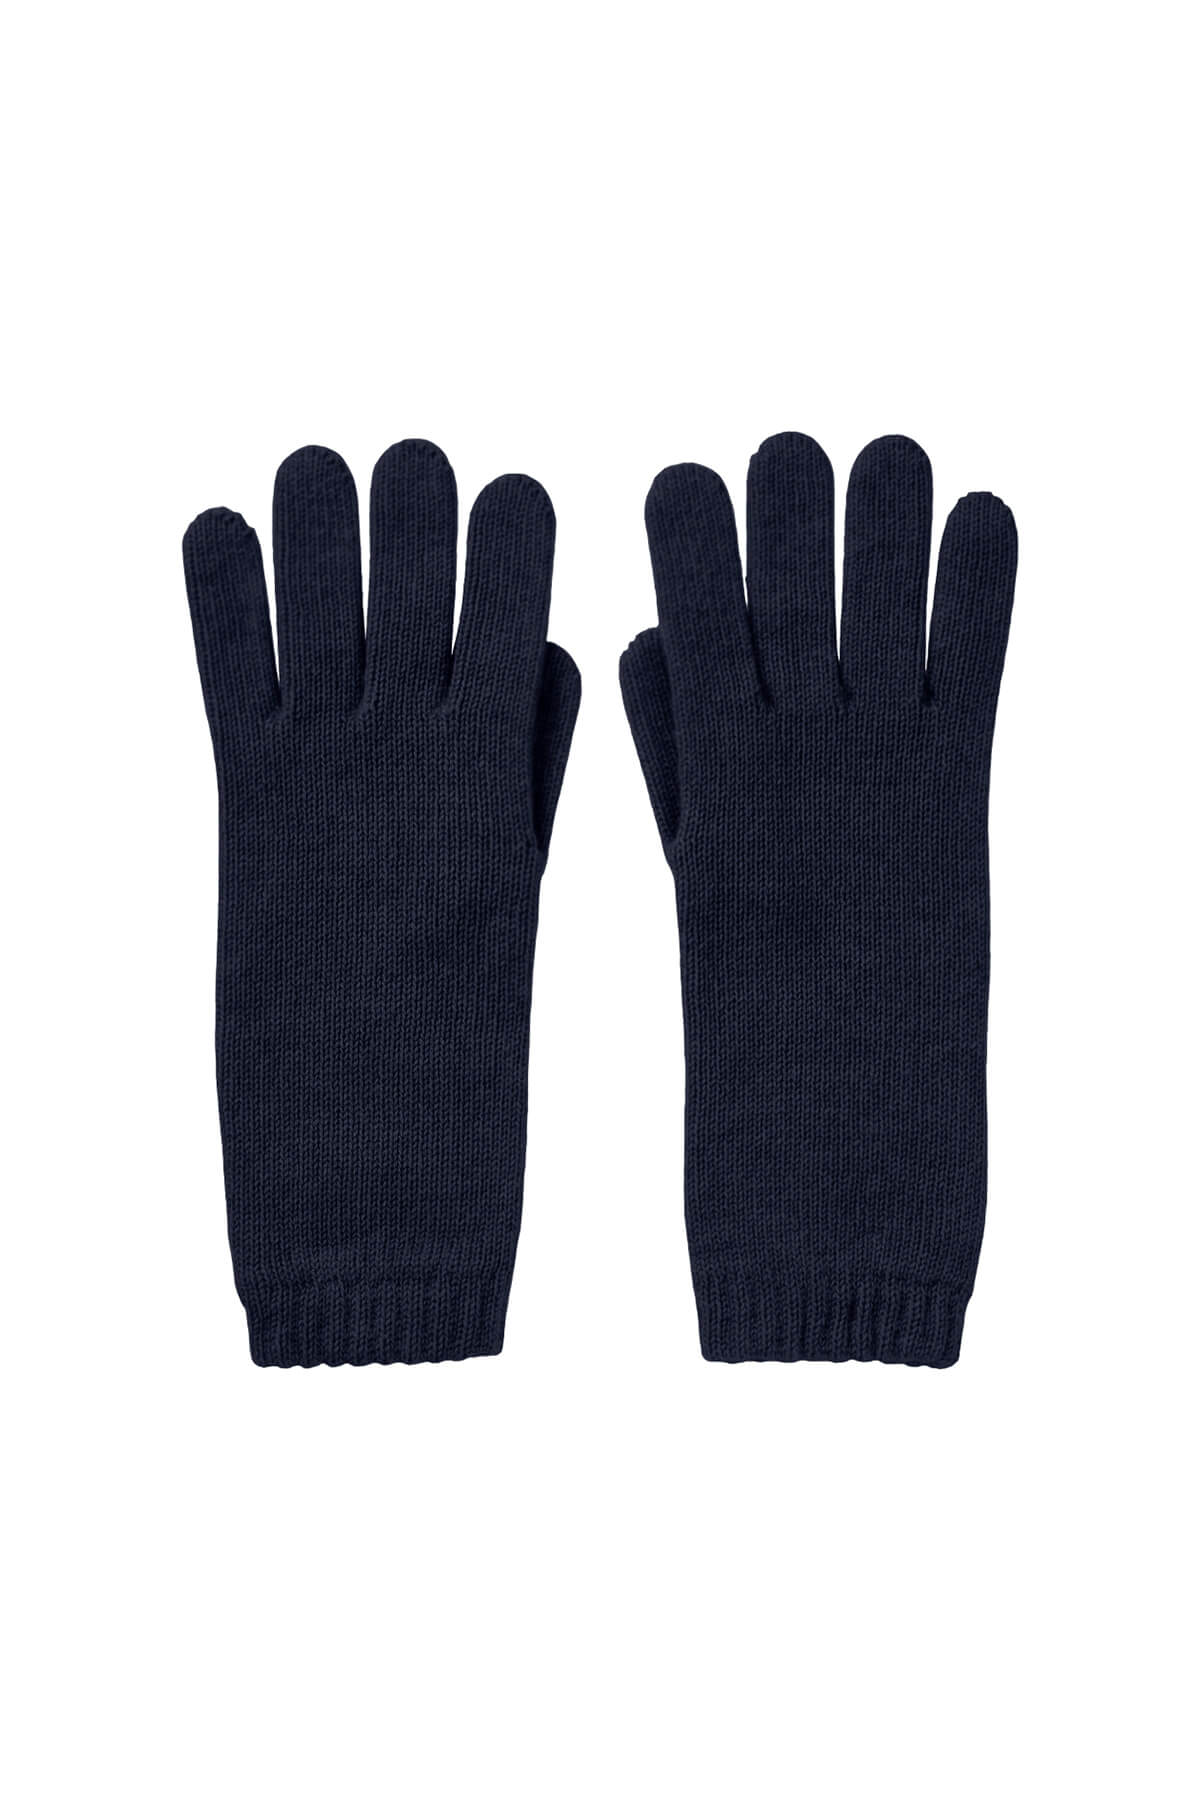 Johnstons of Elgin Women's Cashmere Accessories Gift Set Navy Gloves on a white background 365GIFTSET7D